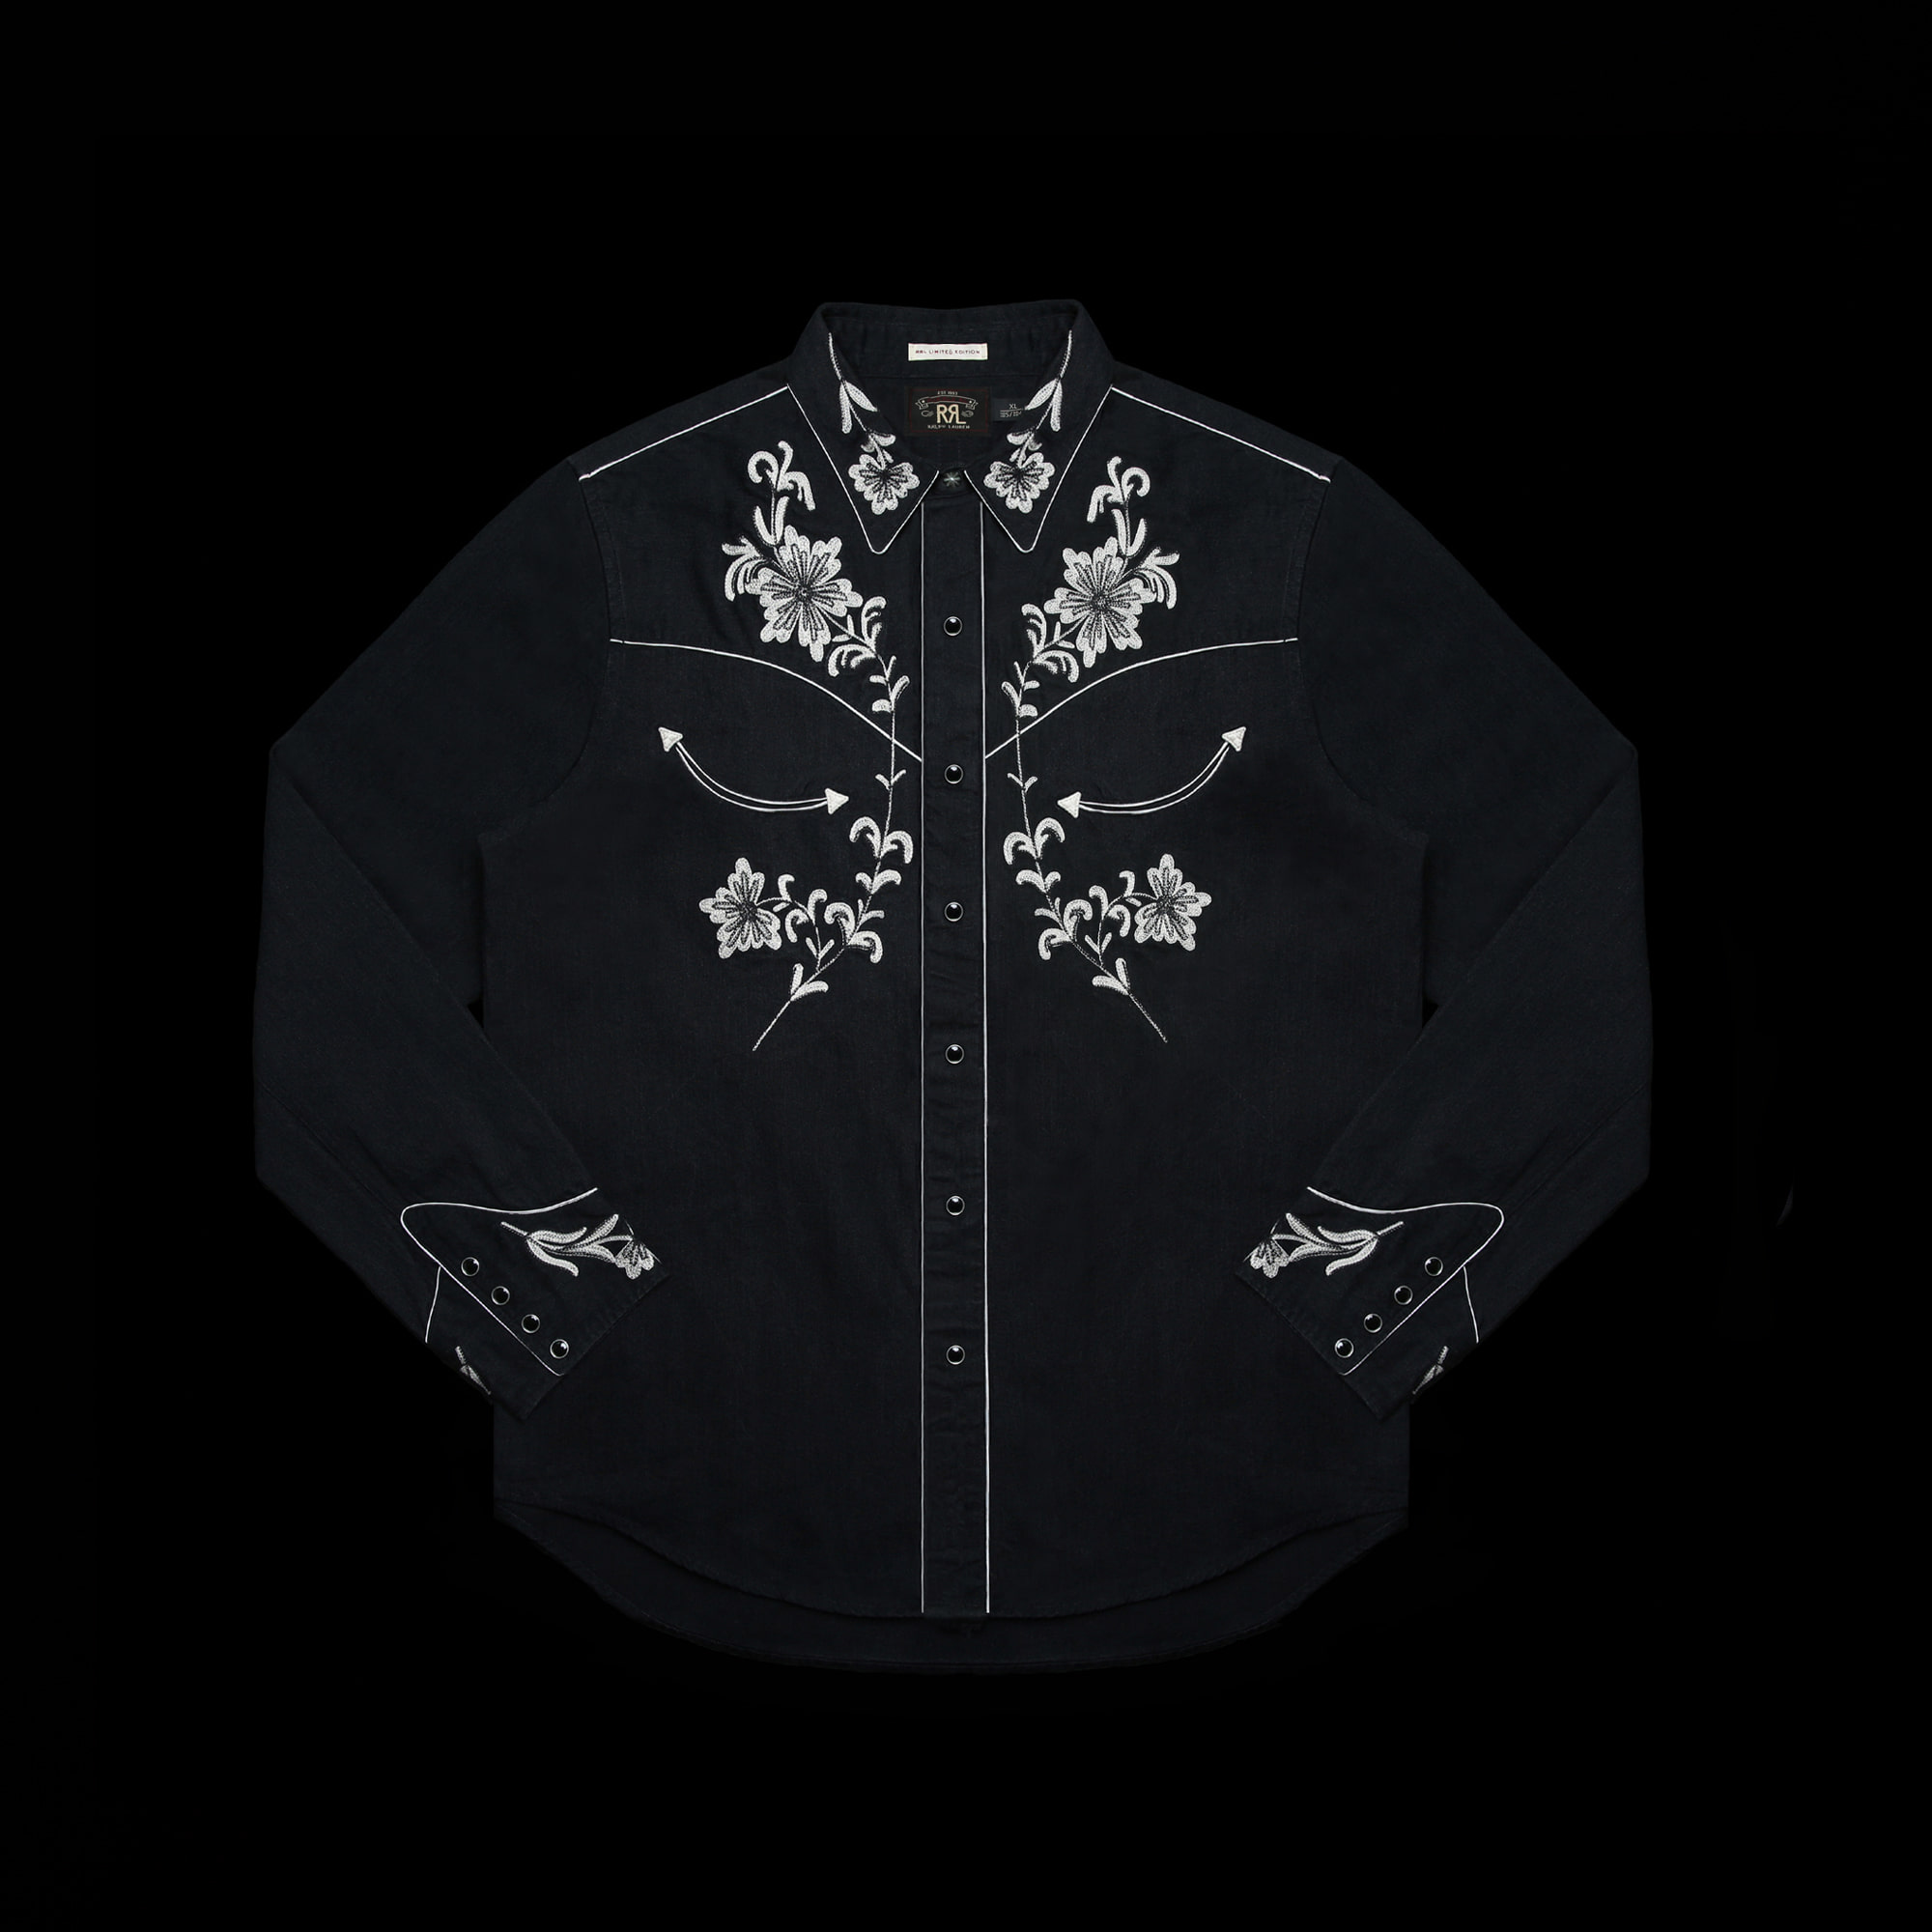 RRLLIMITED EDITIONEMBROIDERED WESTERN SHIRT